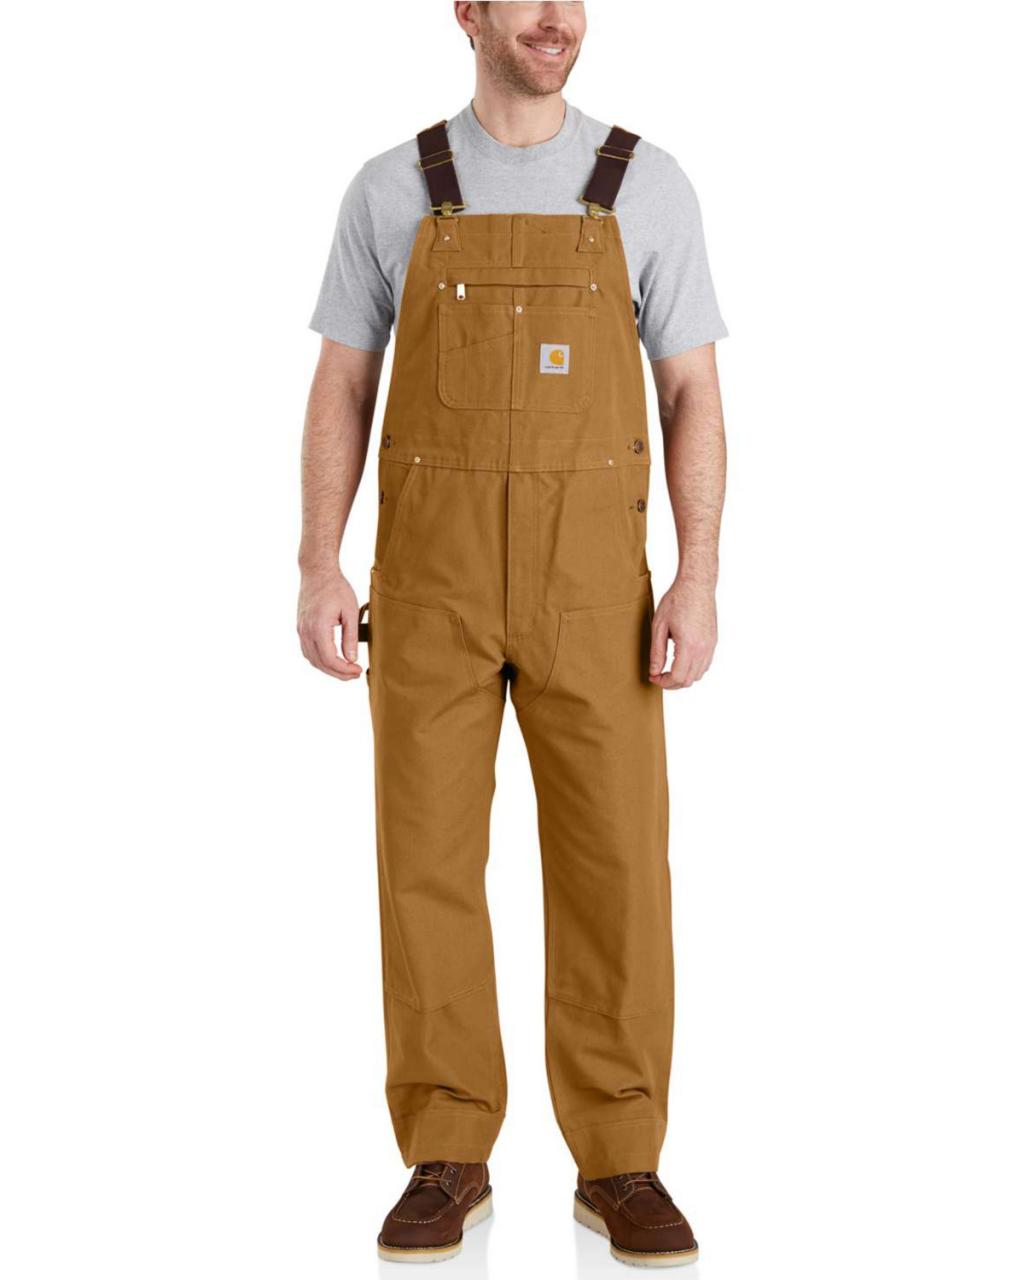 Buy Carhartt Men's Relaxed Fit Duck Bib Overall Online in Italy. B07GFCQ5SQ